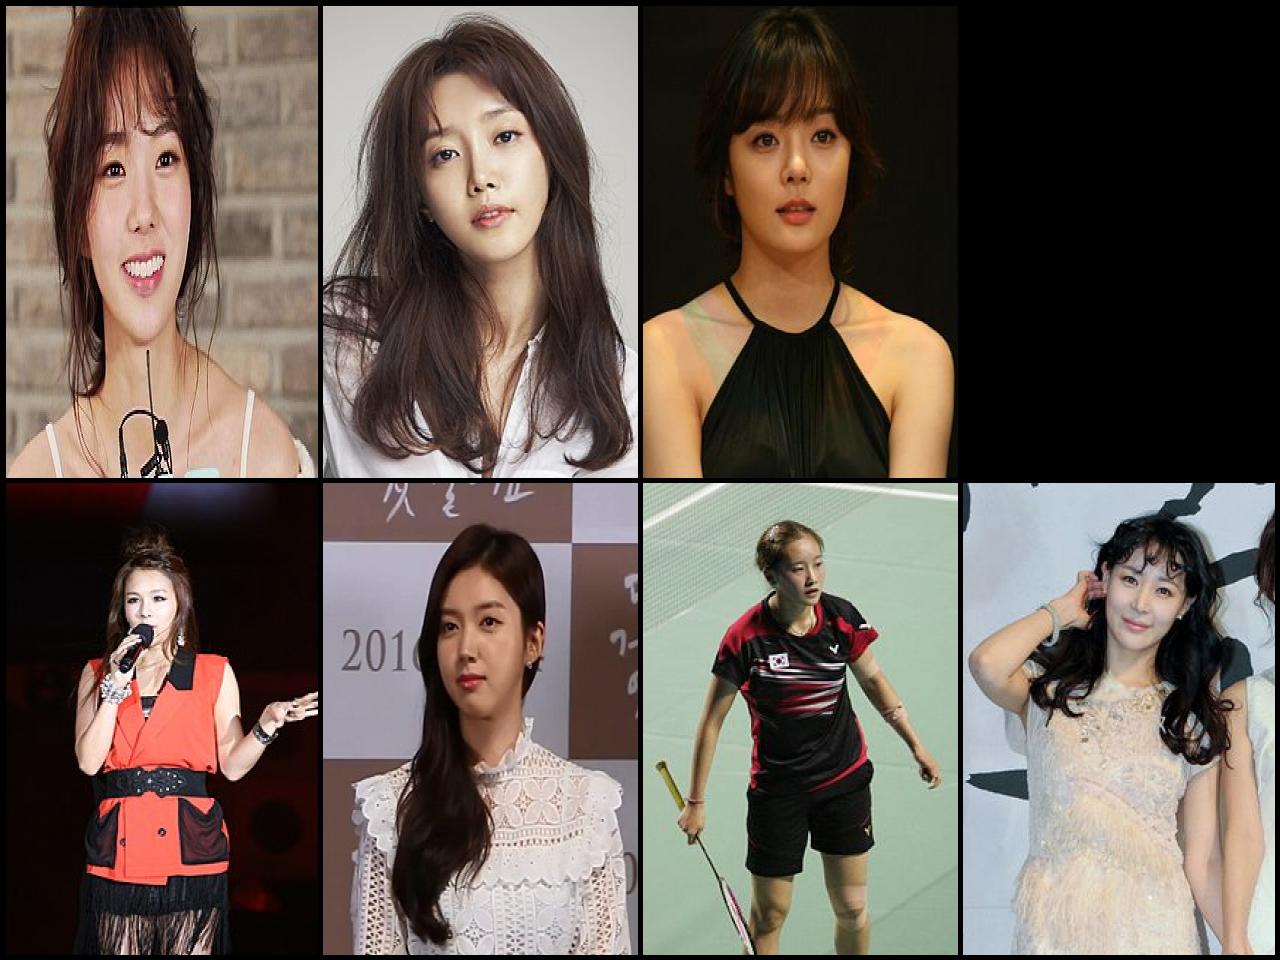 List of Famous people named <b>Chae</b>